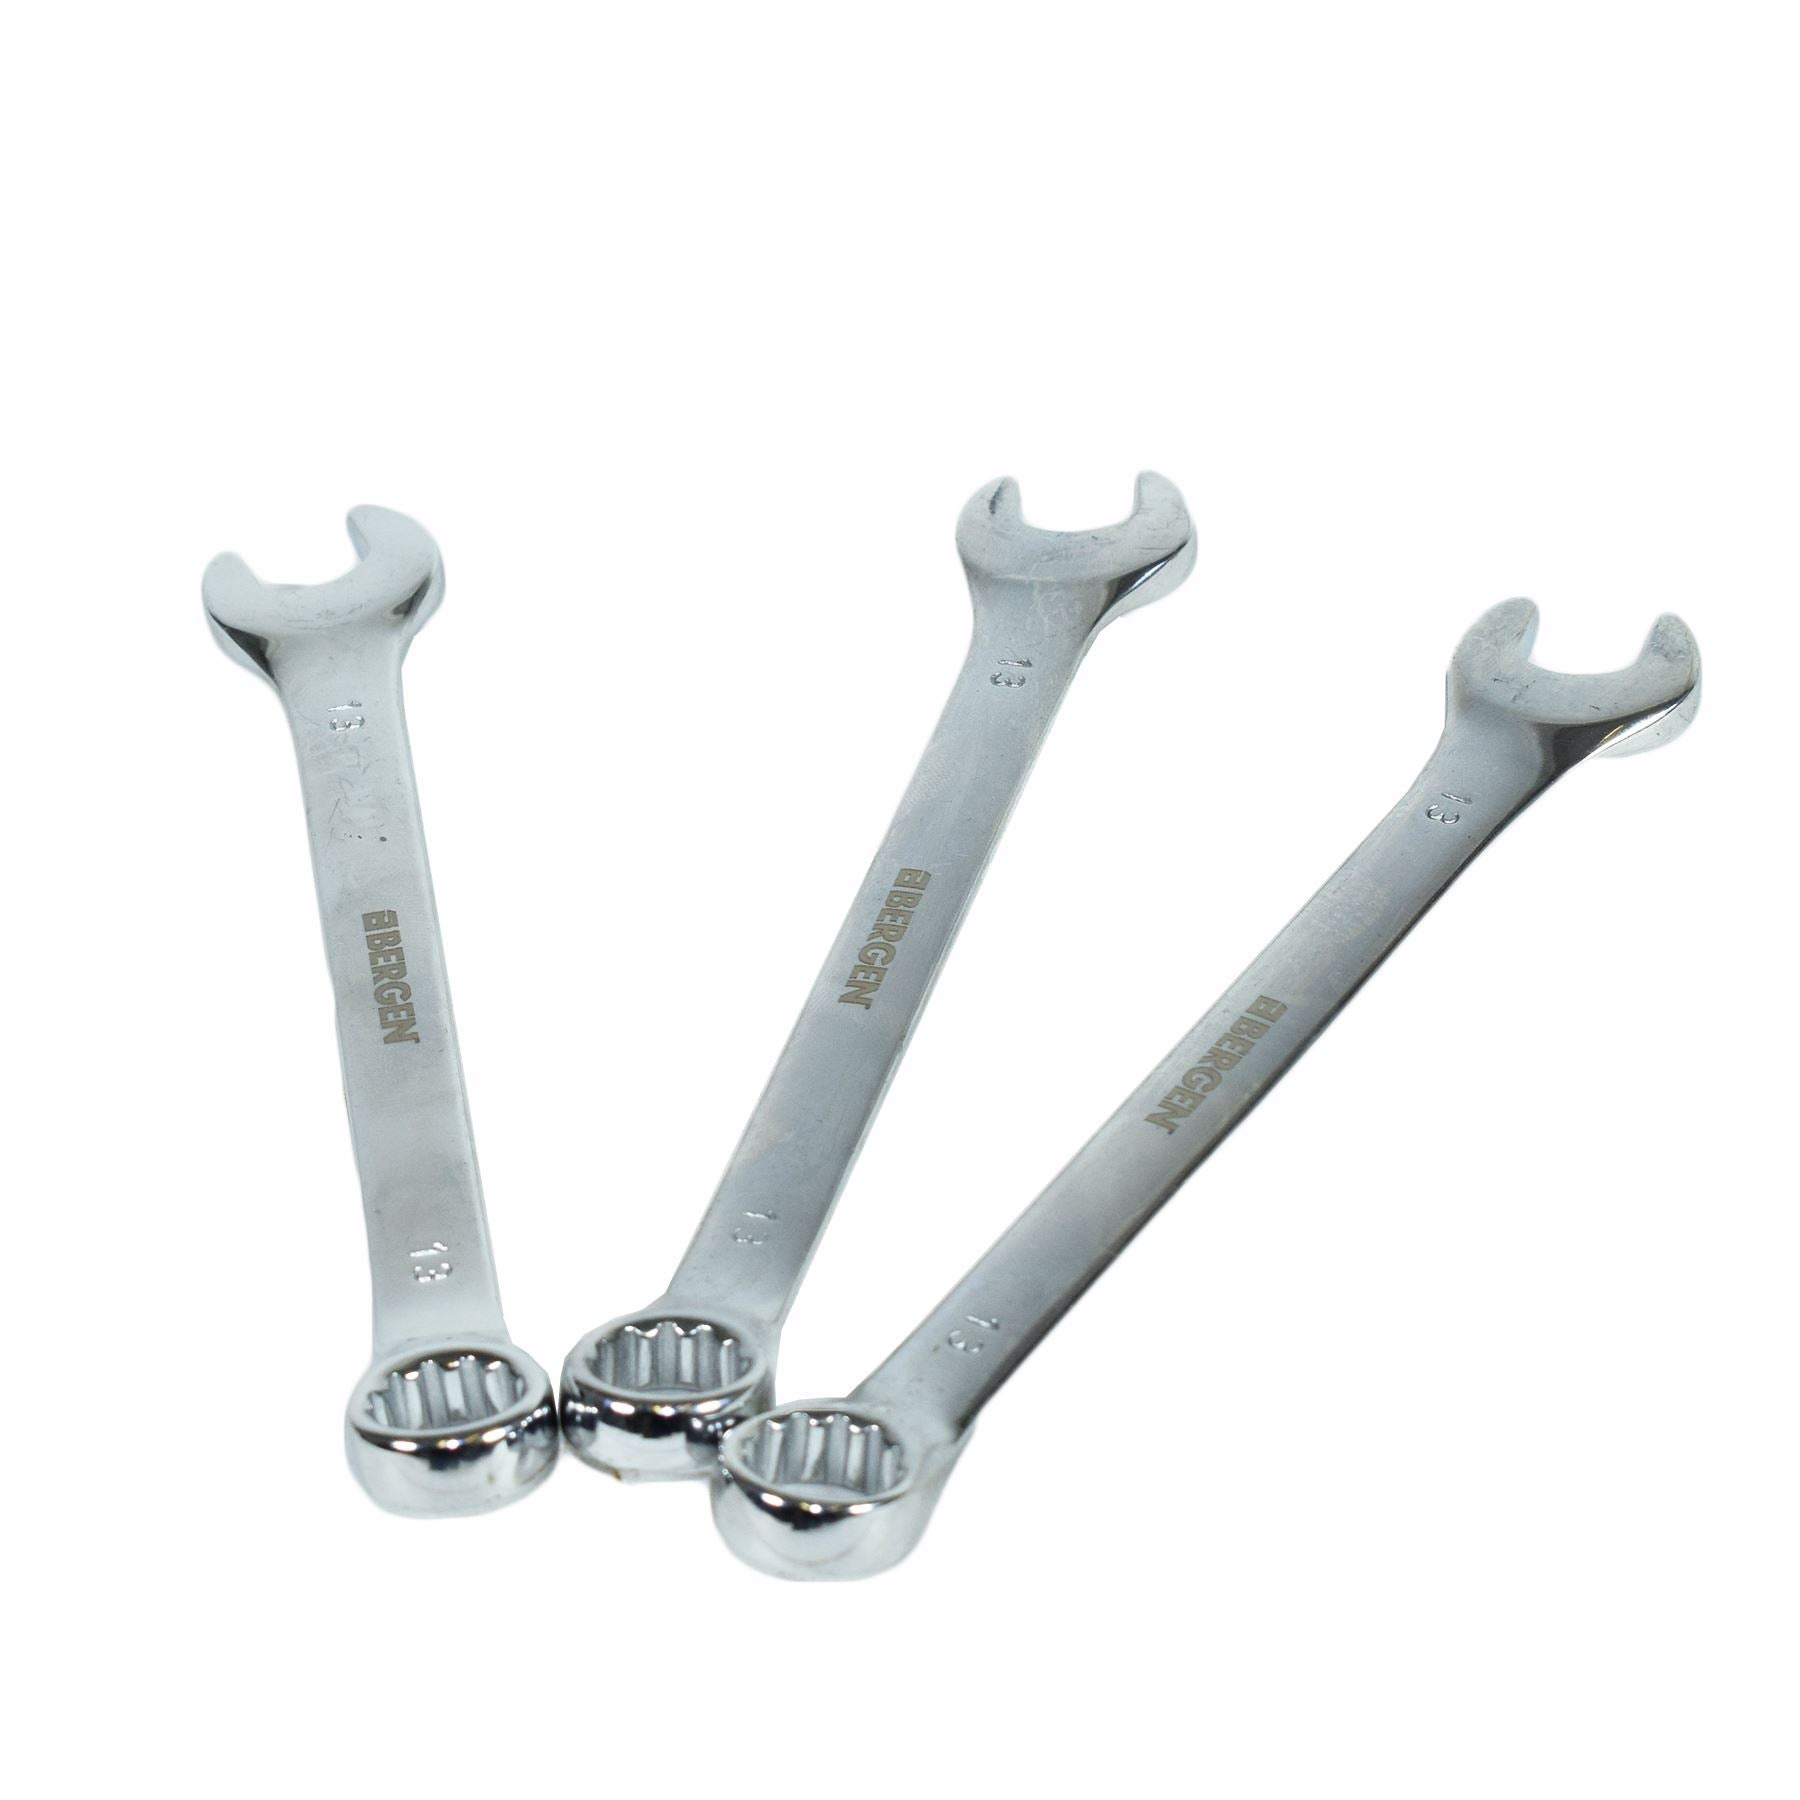 10mm And 13mm Metric Combination Spanners Spanner 3 Of Each 6 Pack